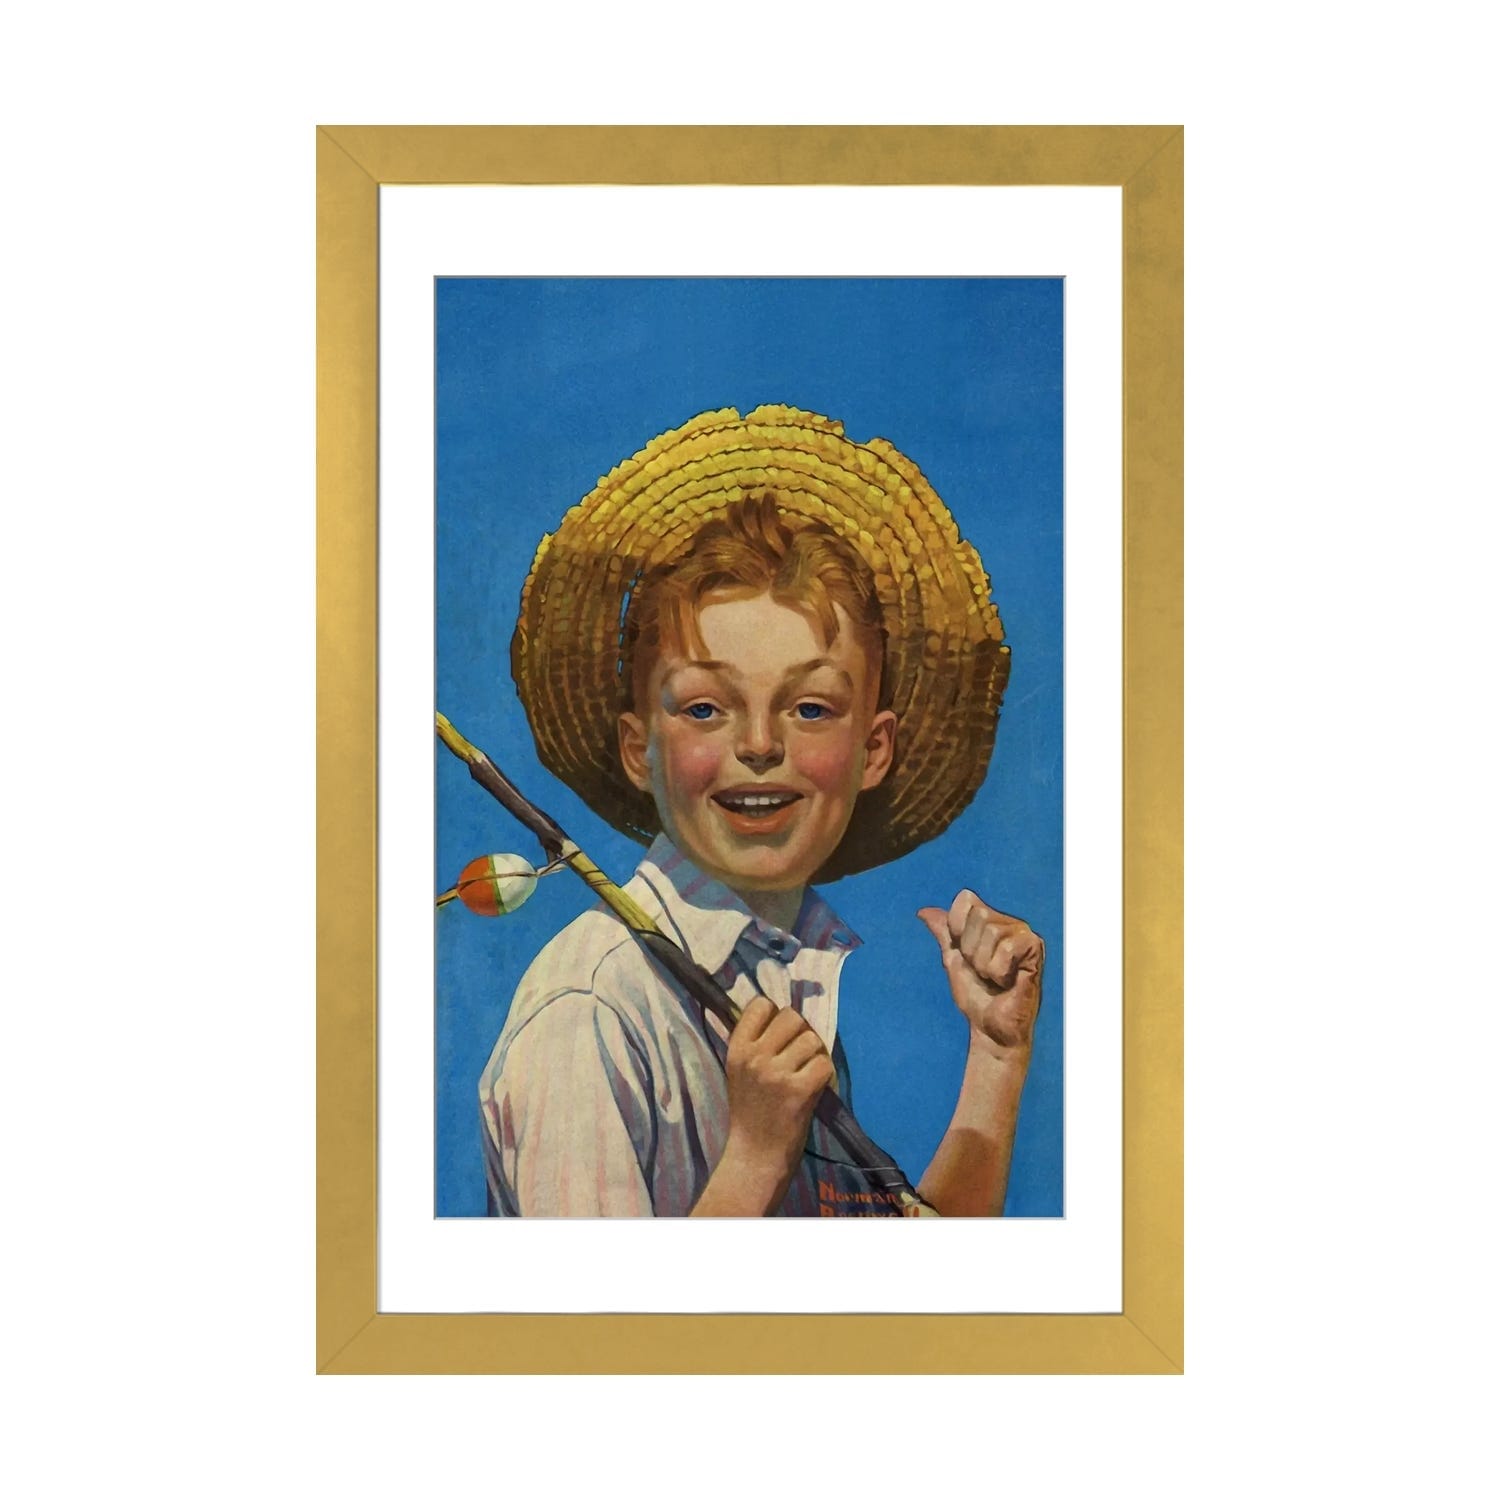 iCanvas Boy with Fishing Pole by Norman Rockwell - Bed Bath & Beyond -  37600341